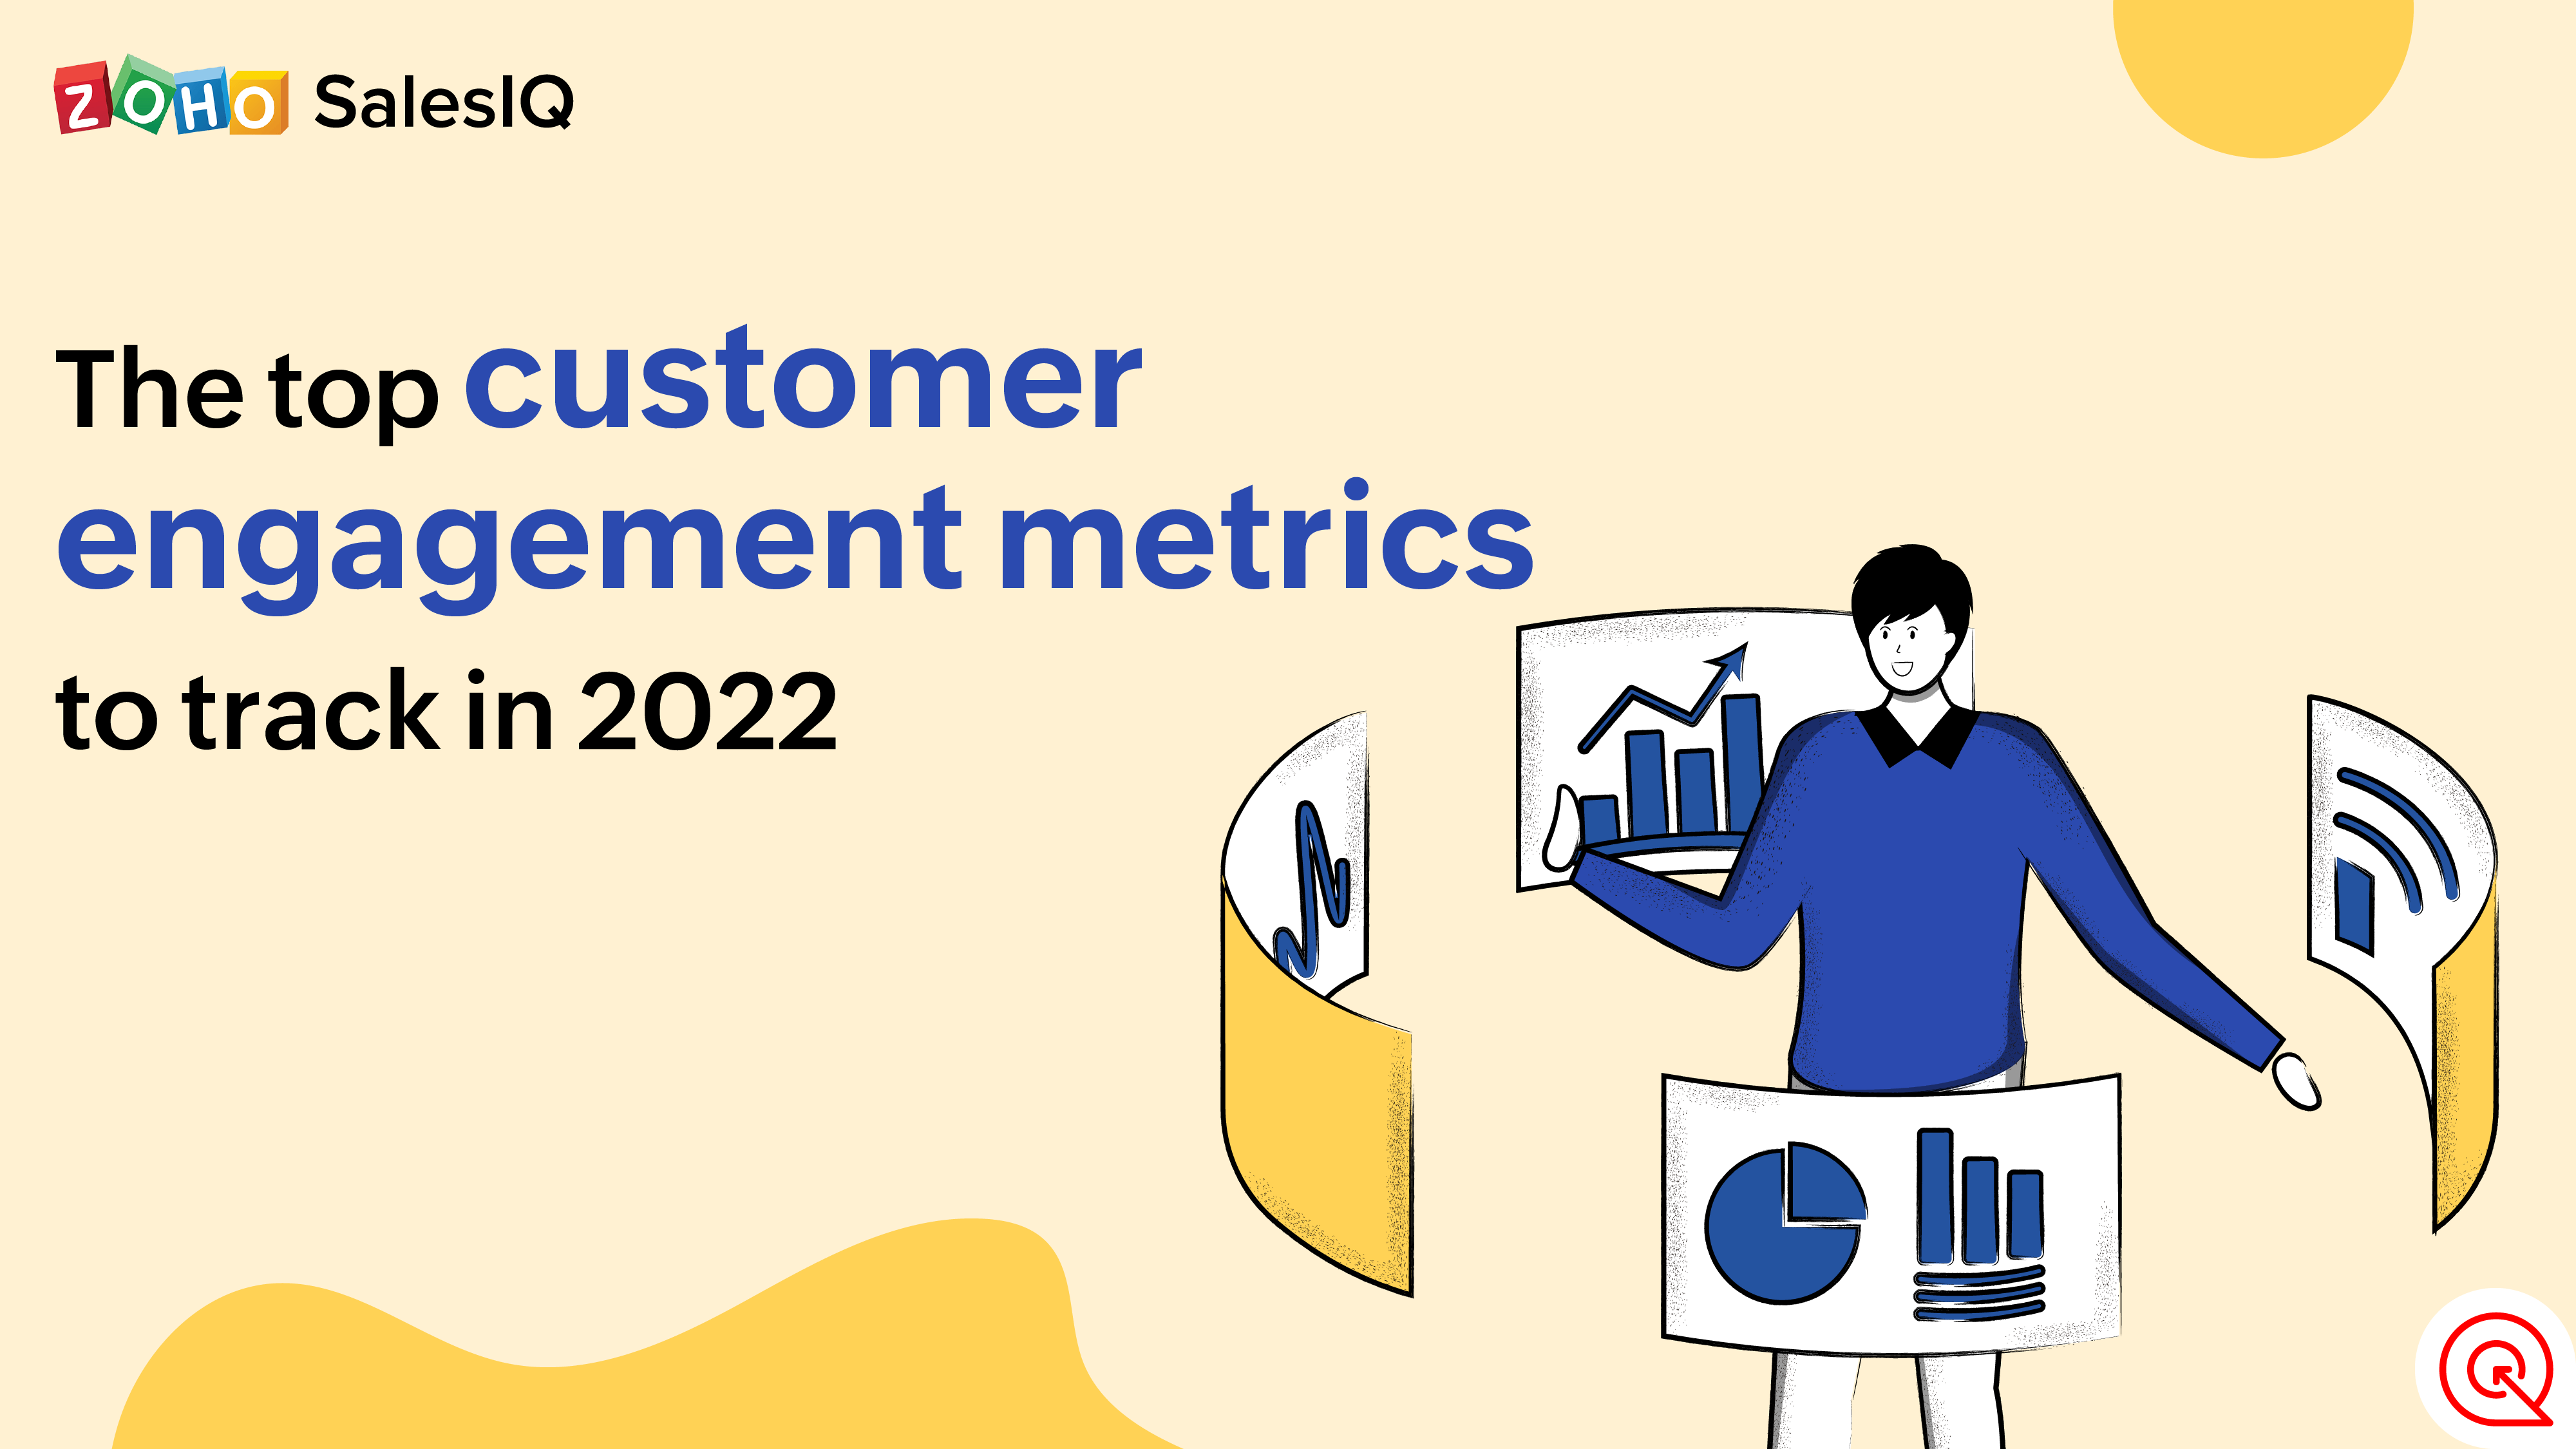 Top customer engagement metrics to track in 2022